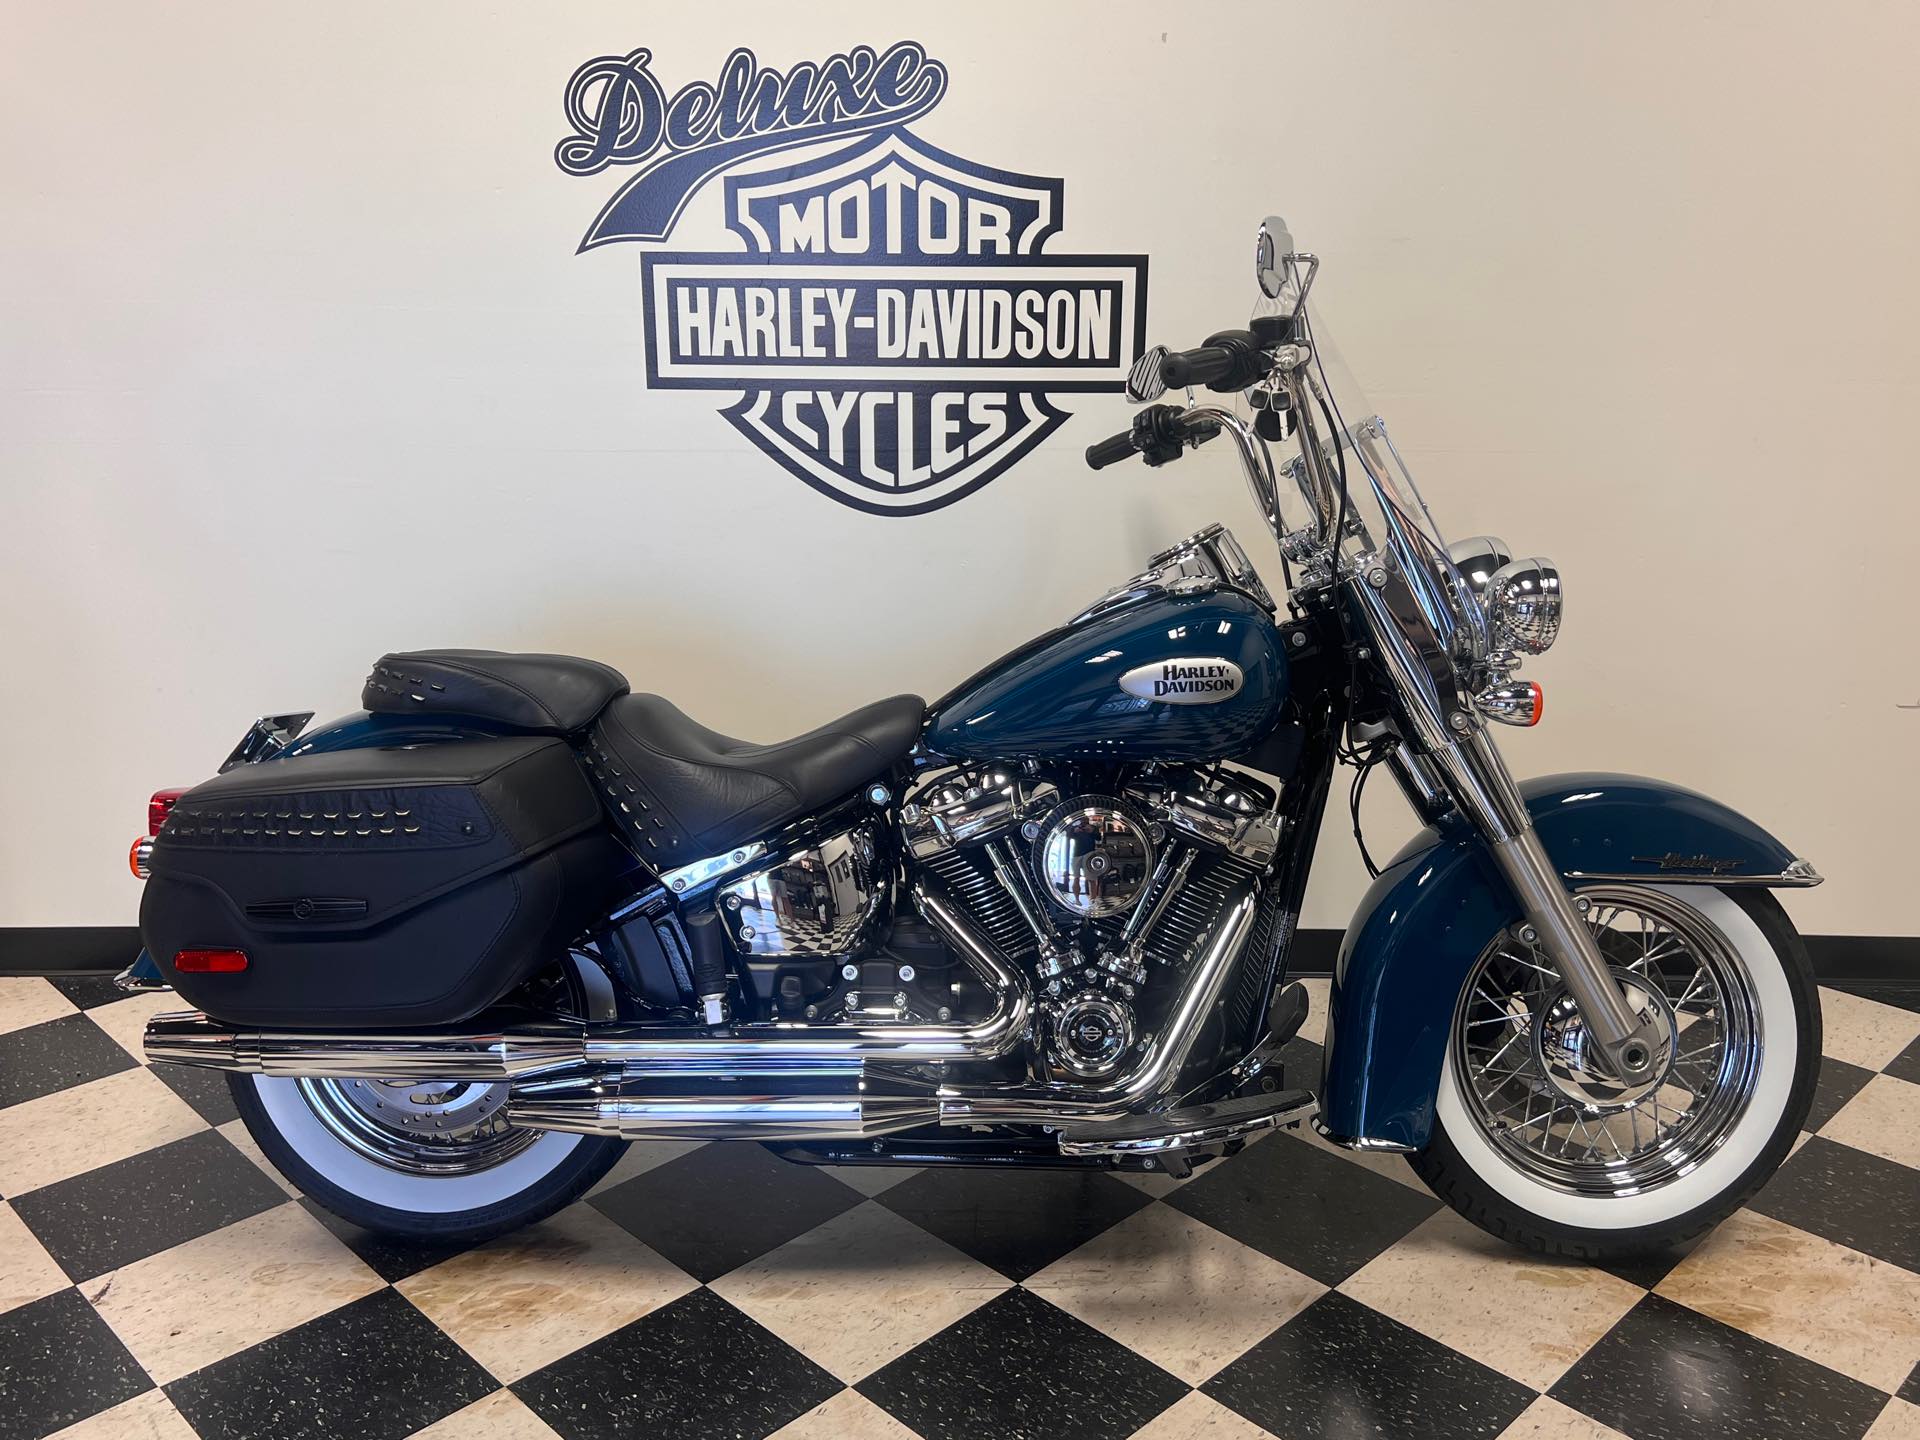 2021 Harley-Davidson Touring FLHC Heritage Classic at Deluxe Harley Davidson